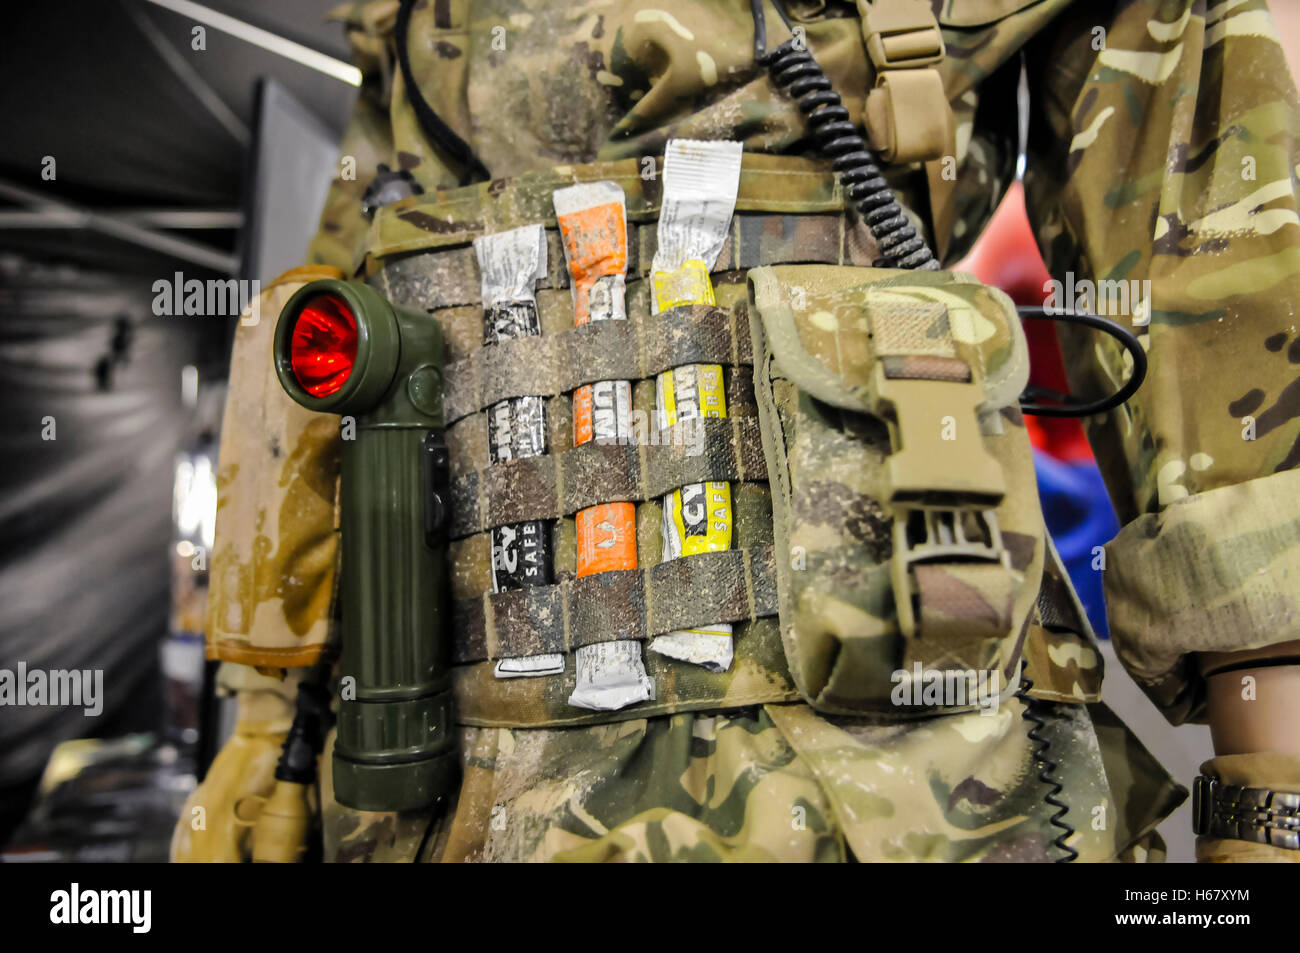 Soldier carries utility belt with a torch with red filter, and Cyalume glow sticks for nightime operations. Stock Photo